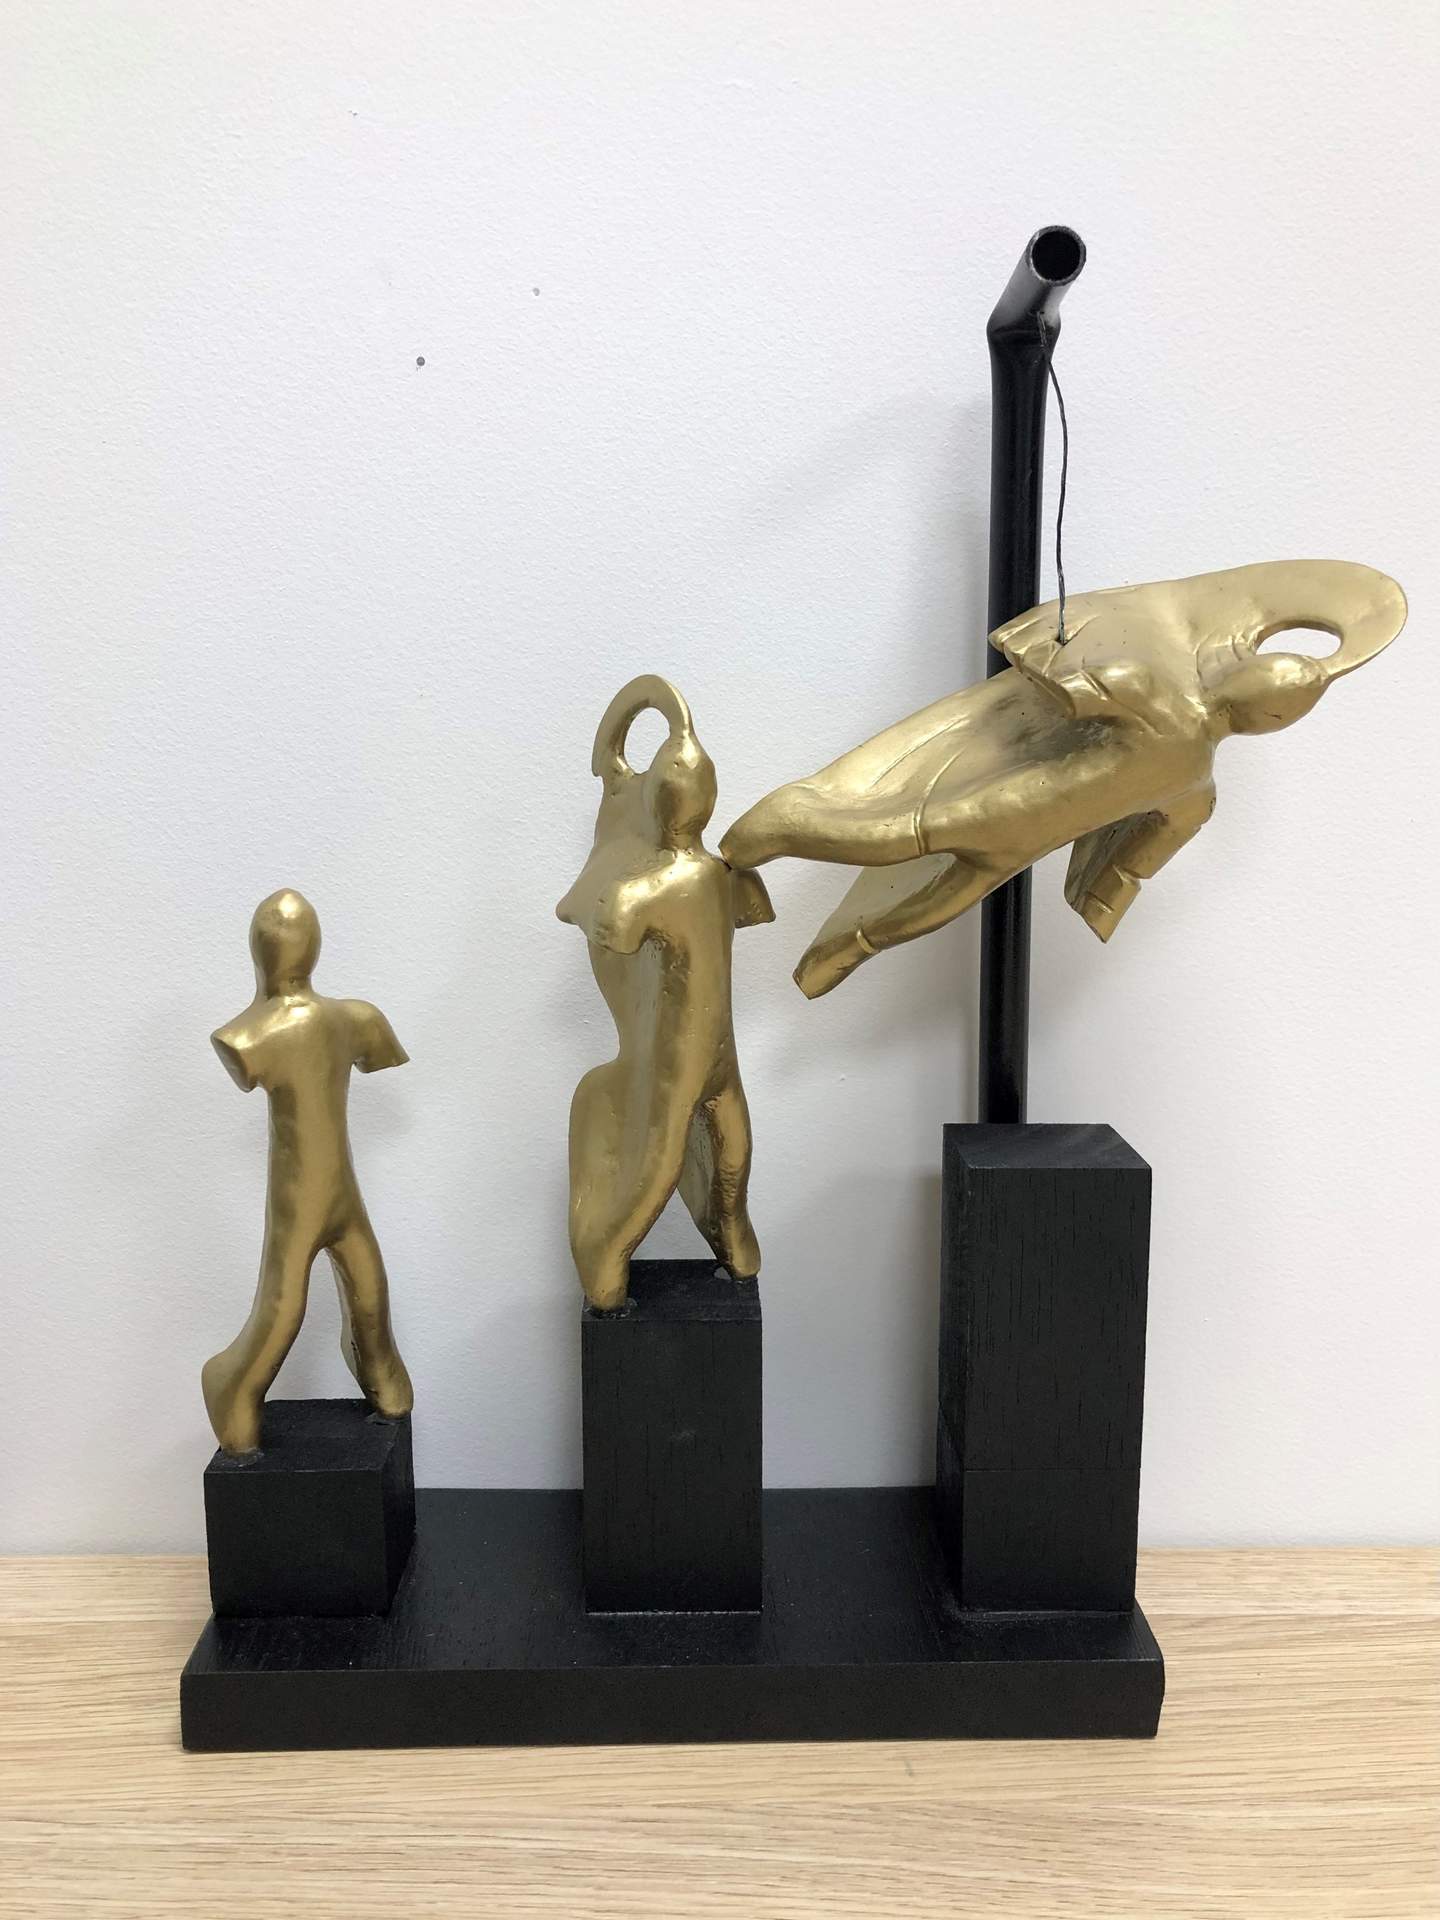 Gold and black sculpture of a persons evolution into a superhero like figure. Young People of Bayside Art Awards 2023, Maxim B 18 to 25 Runner Up. 